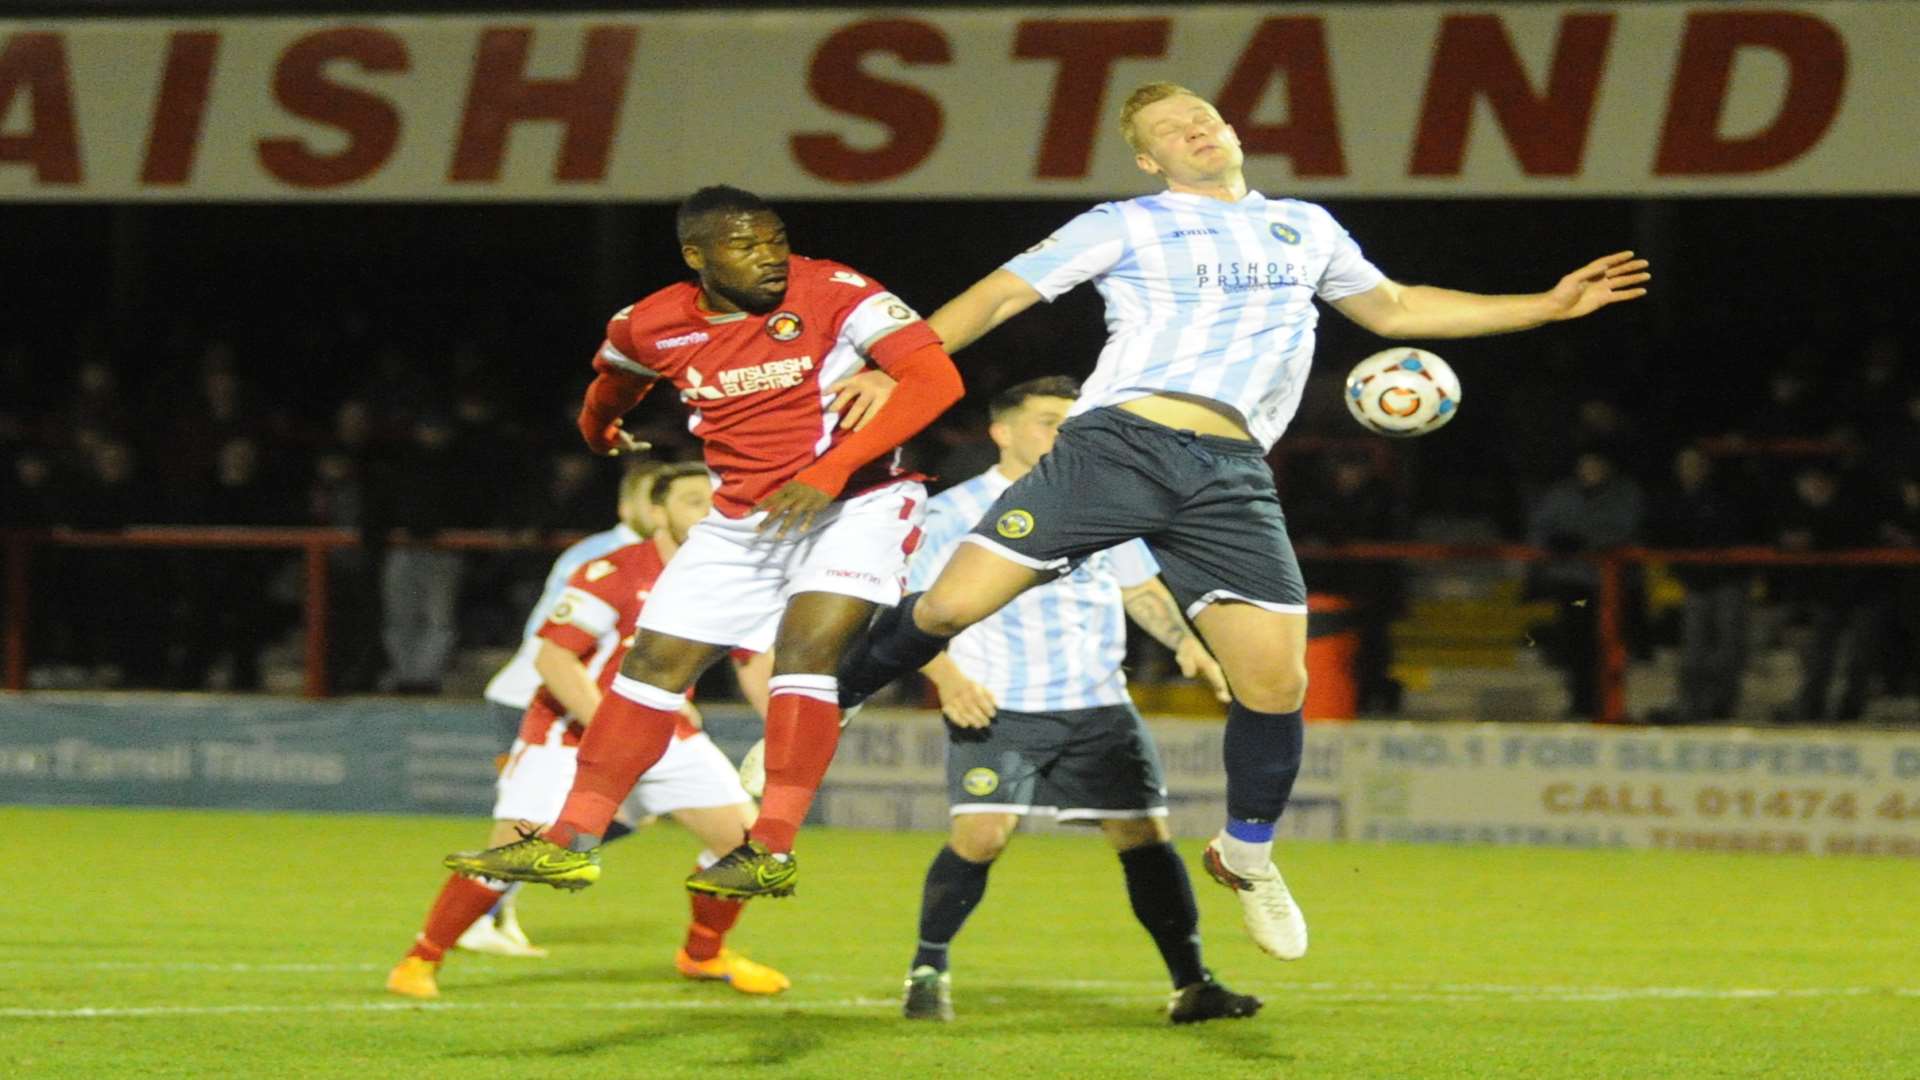 Ebbsfleet striker Aaron McLean challenges for the ball in the air Picture: Steve Crispe